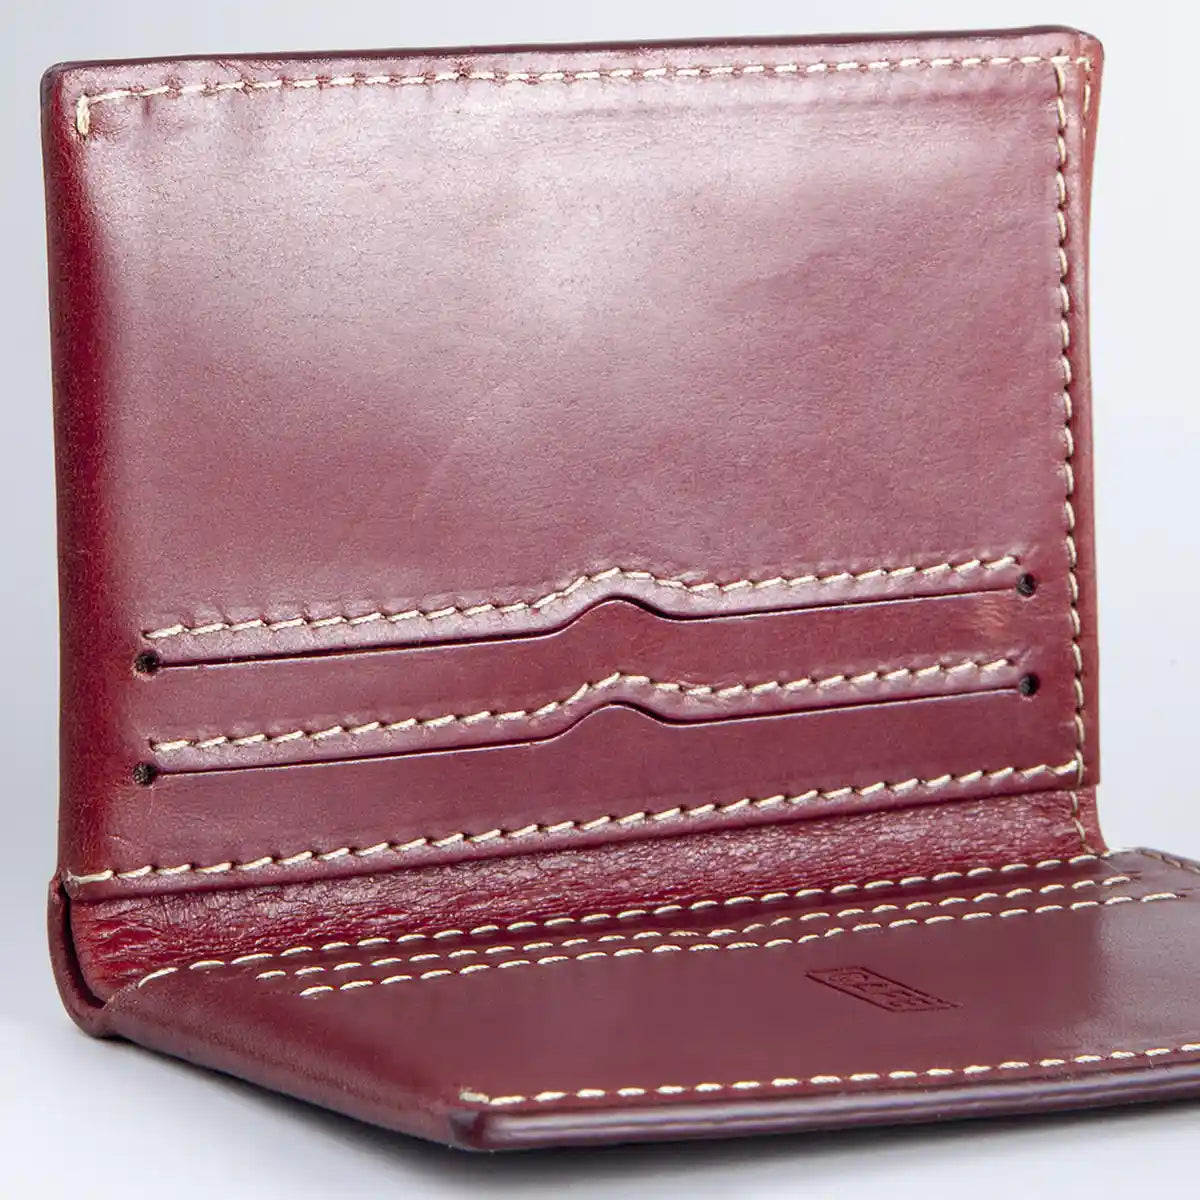 Slim Leather Wallet Costa Rica - Berry